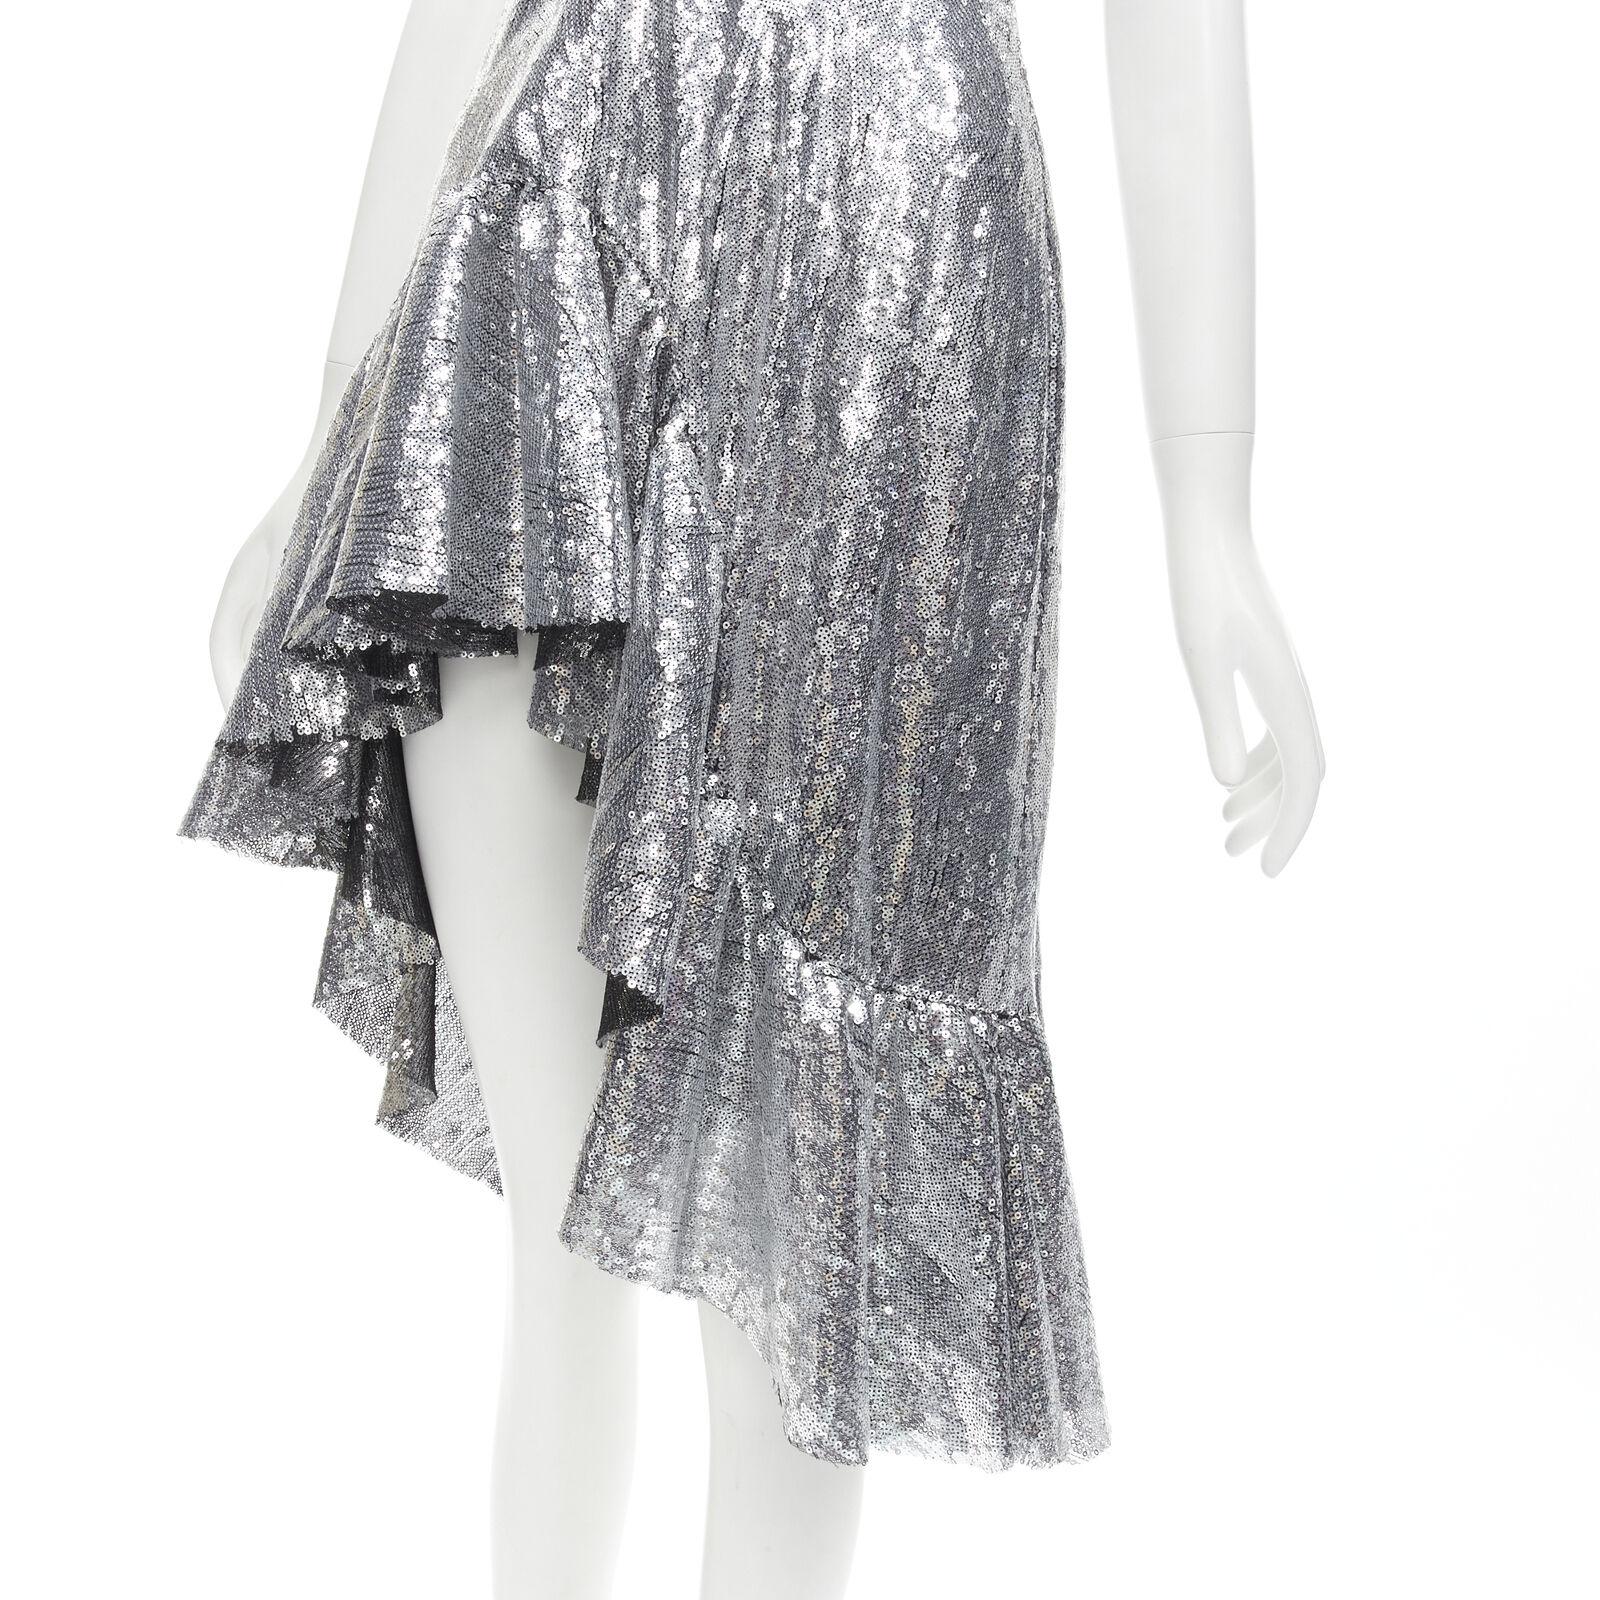 GIUSEPPE DI MORABITO LUISAVIAROMA silver sequins ruffle skirt dress IT38 XS
Reference: AAWC/A00066
Brand: Giuseppe Di Morabito
Model: Luisa Via Roma collaboration
Material: Polyester
Color: Silver
Pattern: Solid
Closure: Zip
Lining: Polyester
Extra